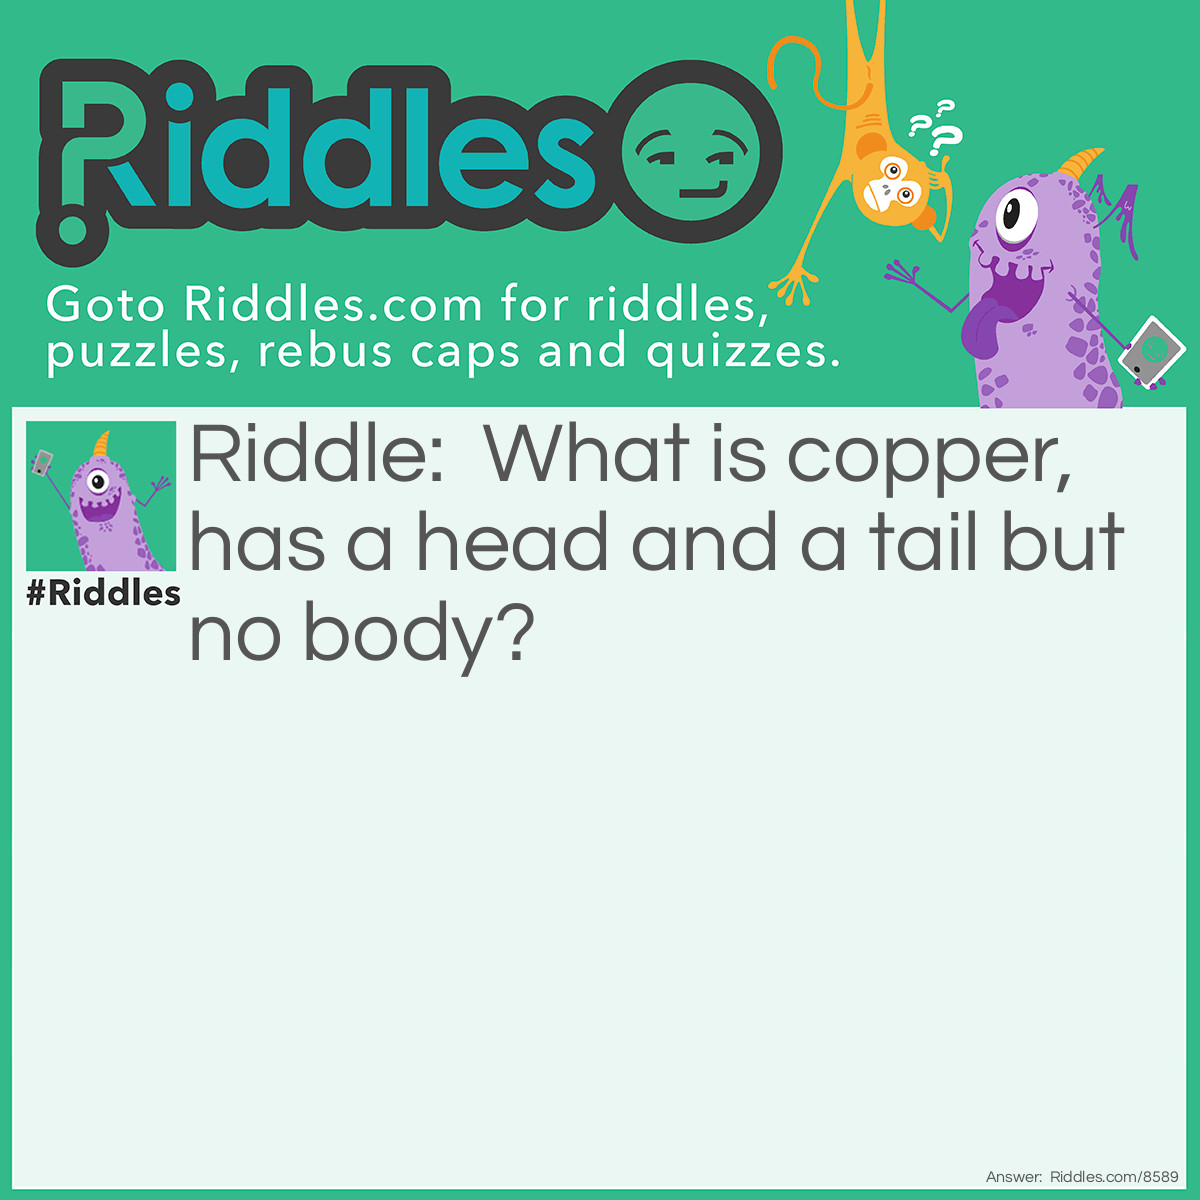 Riddle: What is copper, has a head and a tail but no body? Answer: A penny.